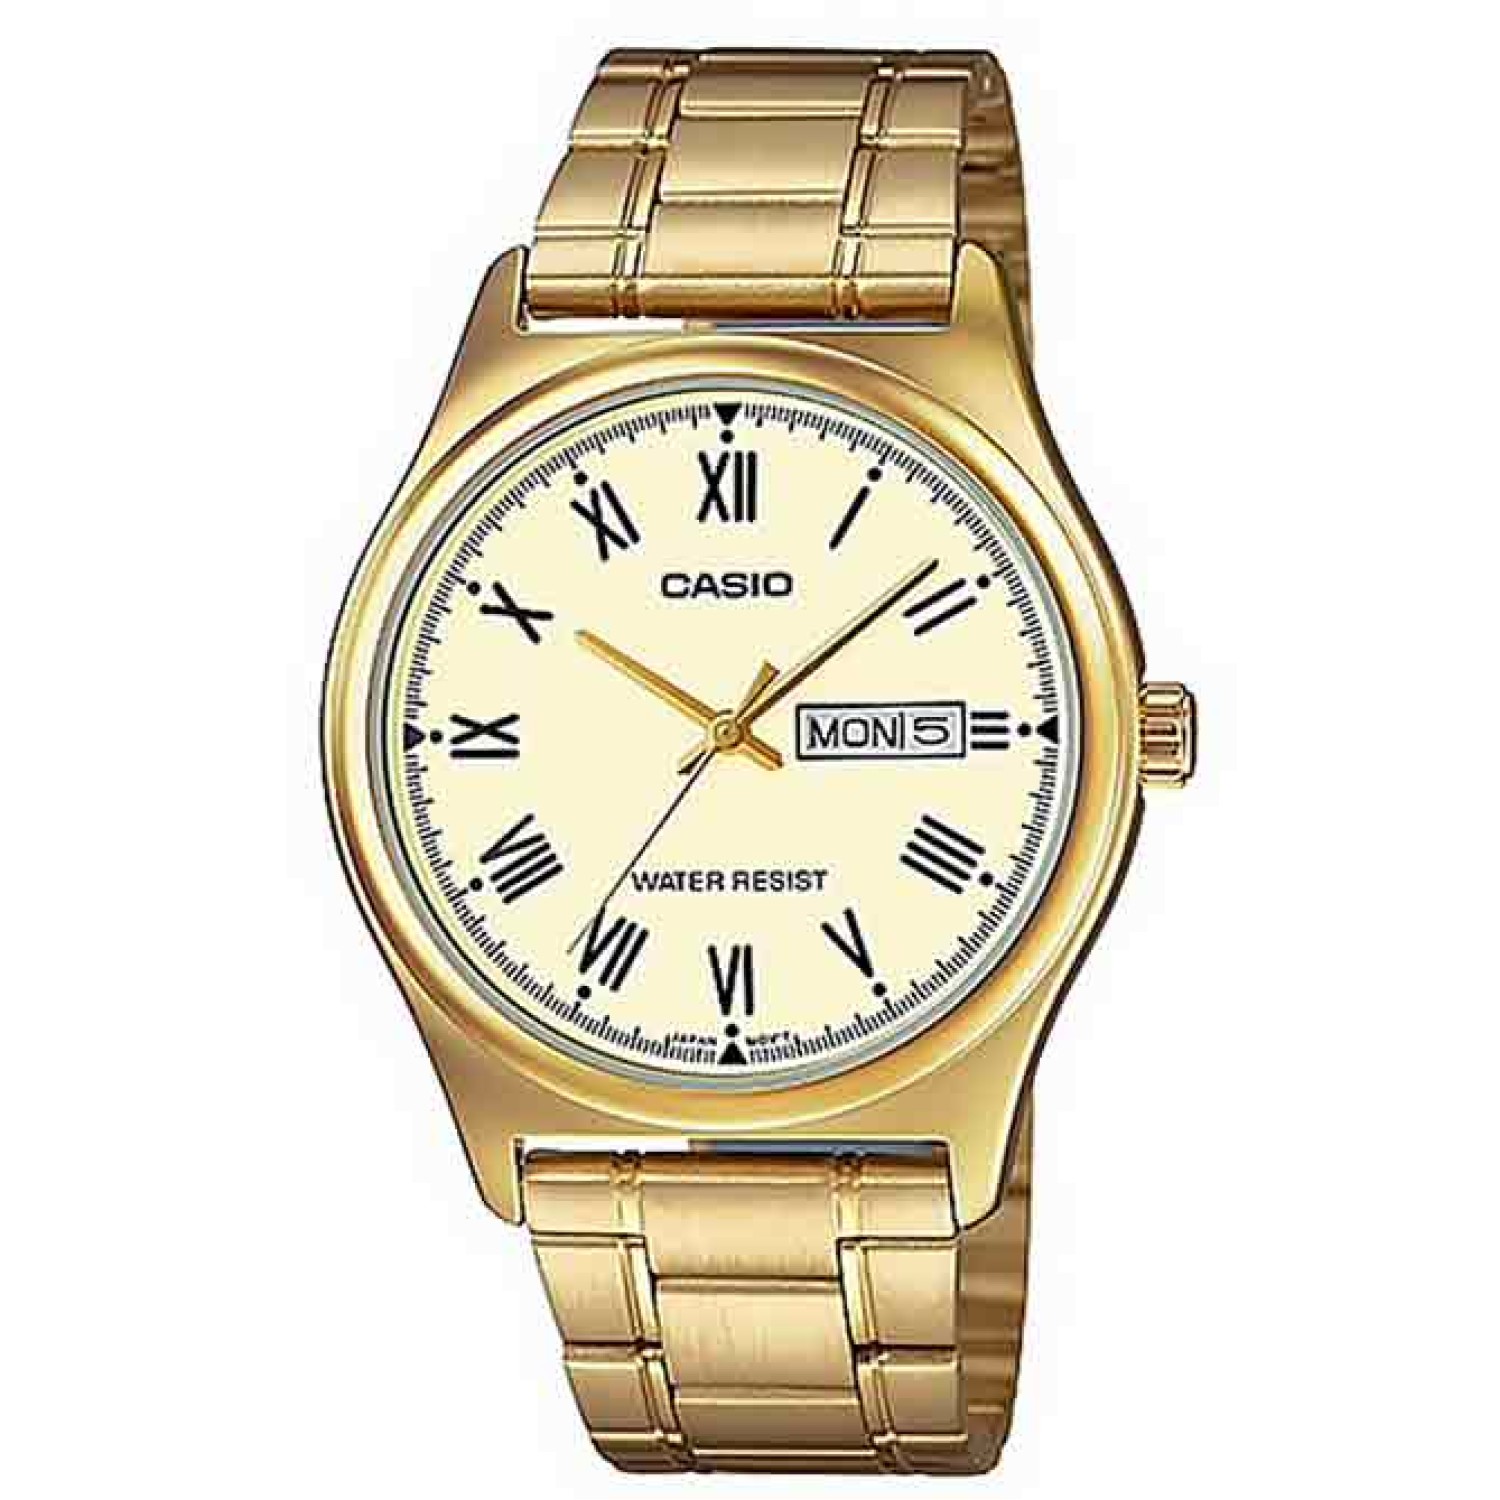 MTPV006G-9B Casio Mens Watch. From Casio a series of analogue  IP Gold plated watches with clear easy to read dials with day and dateOxipay is simply the easier way to pay - use Oxipay and well spread your payment up to a maximum of $1500 over @christies.